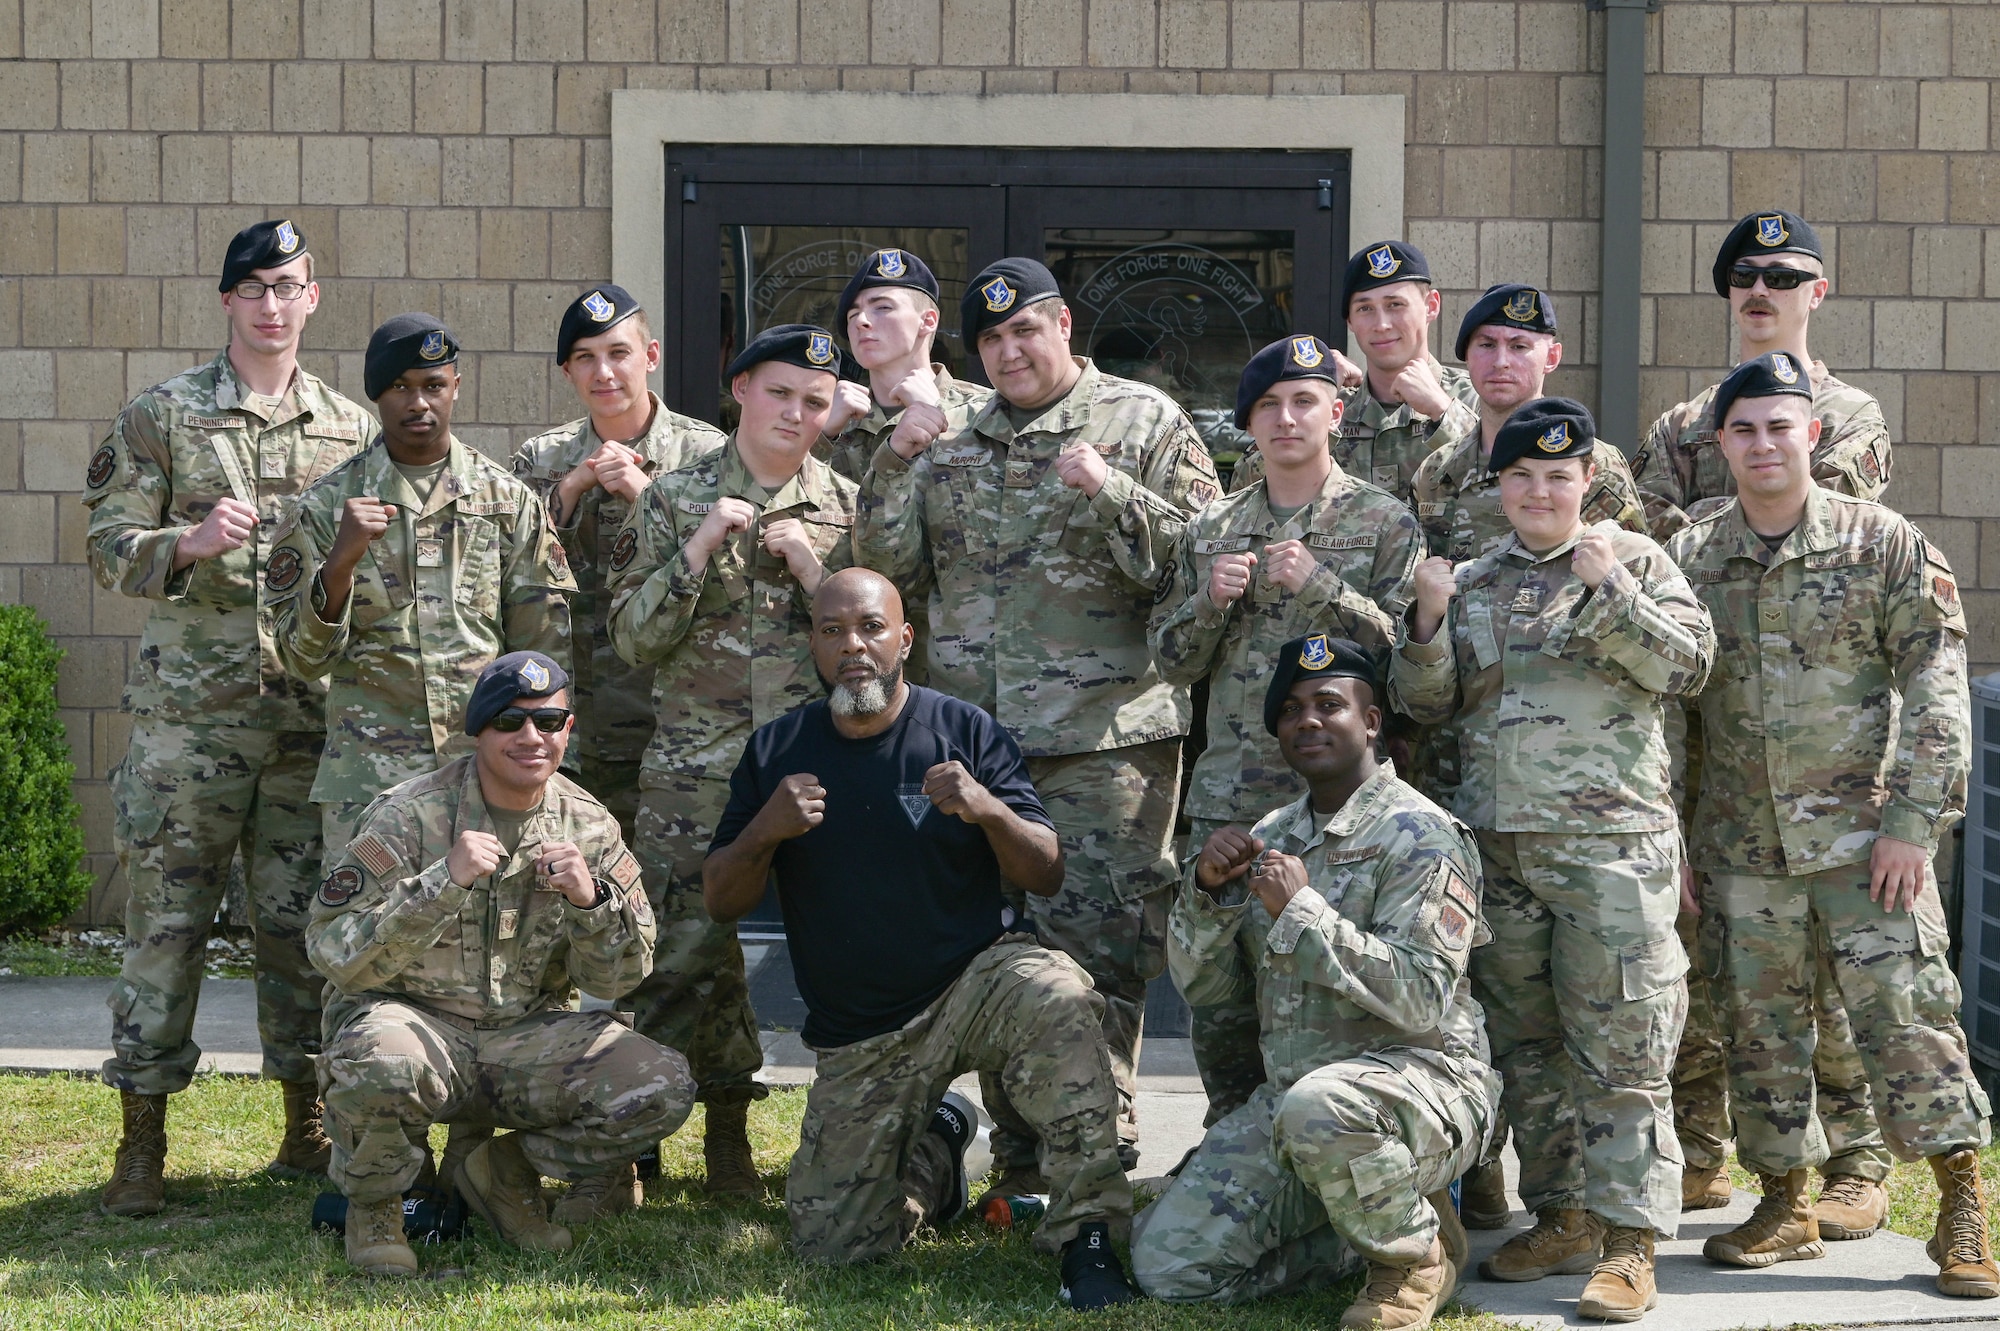 The 23rd Security Forces Squadron S30-B2 “Thunder Cats” flight poses for a photo with Krav Maga instructor Bobby Cumby after four hours of training, April 13, 2022, at Moody Air Force Base, Georgia. Security forces defenders will continue to practice their Krav Maga and Air Force combative skills to be an even more effective force and continue defending installations anywhere at any time. (U.S. Air Force photo by Senior Airman Rebeckah Medeiros)